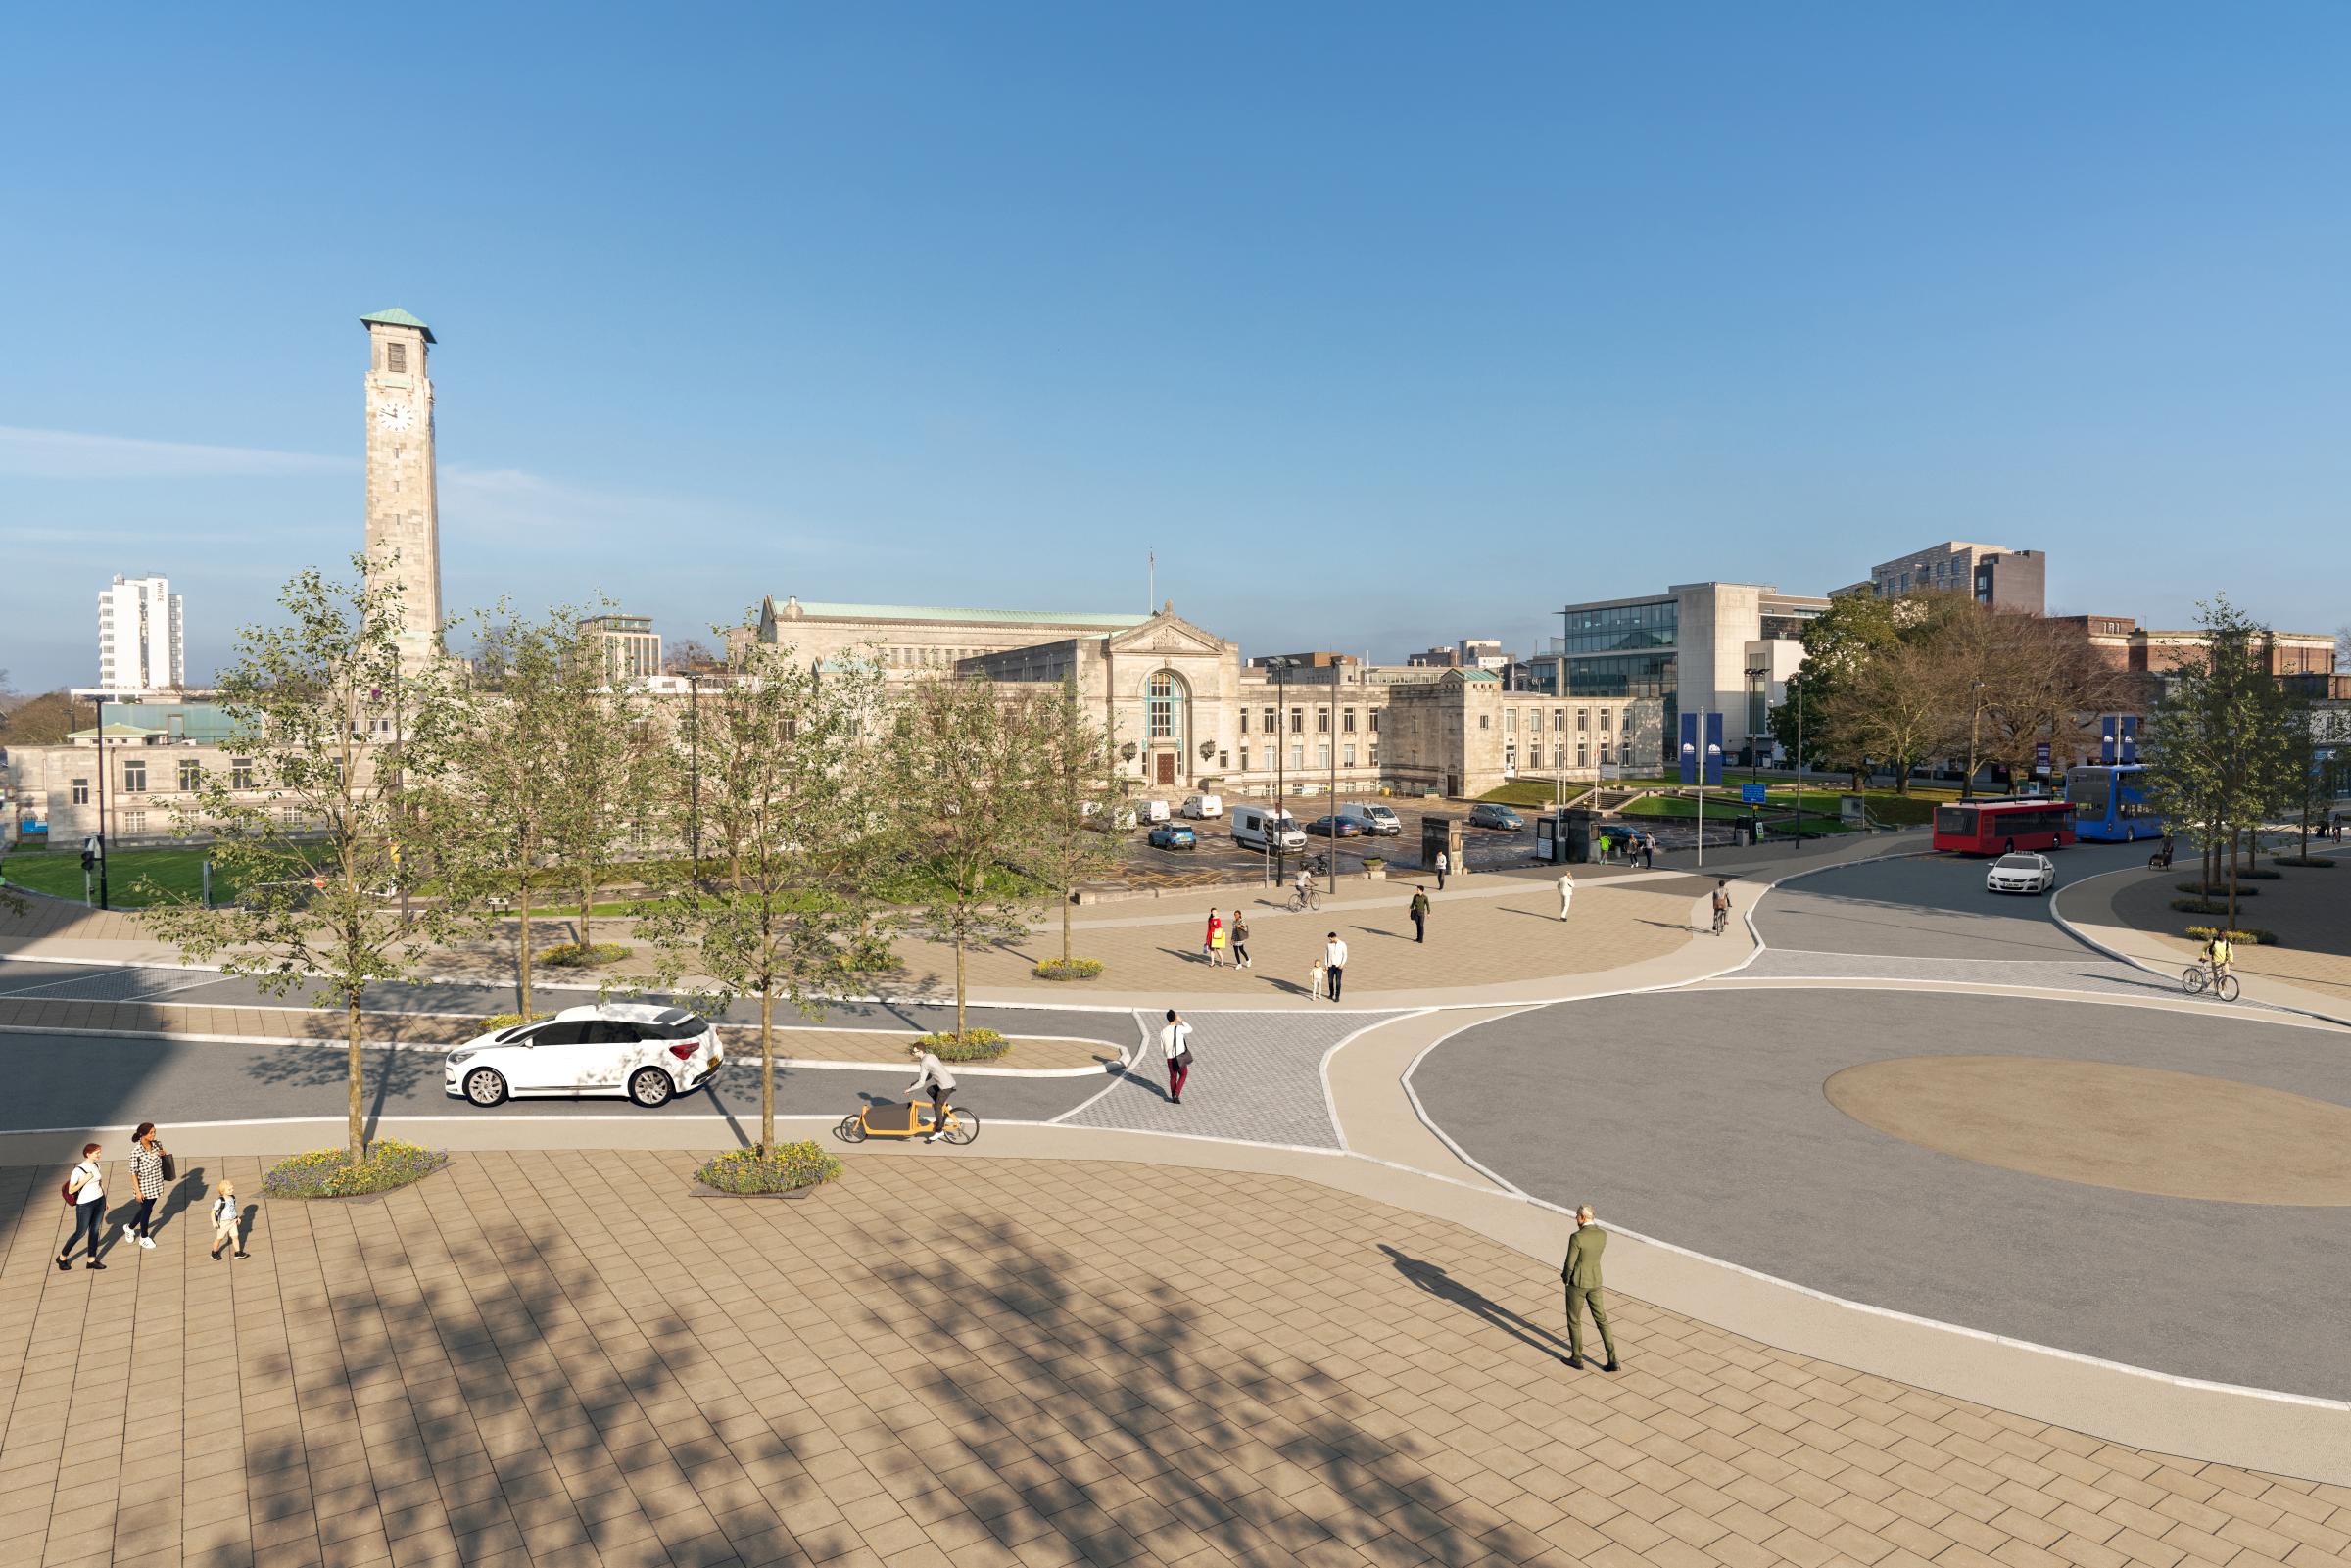 An artist’s impression of how Civic Centre Place could look, complete with a new roundabout